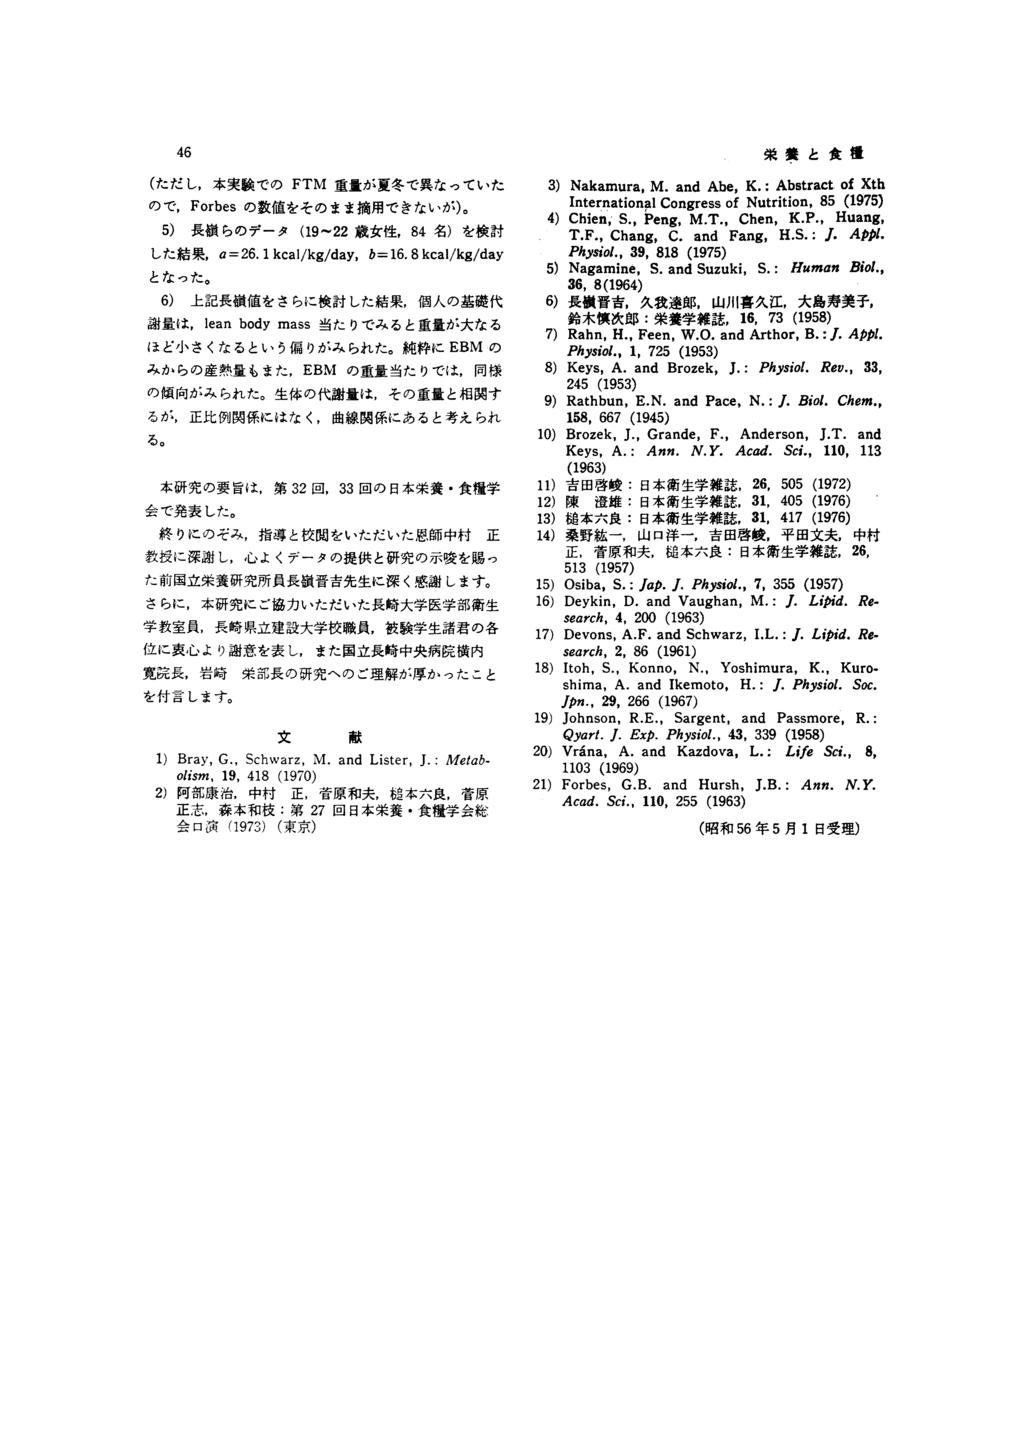 3) Nakamura, M. and Abe, K.: Abstract of Xth International Congress of Nutrition, 85 (1975) 4) Chien, S., Peng, M.T., Chen, K.P., Huang, T.F., Chang, C. and Fang, H.S.: J. Appl. Physiol.